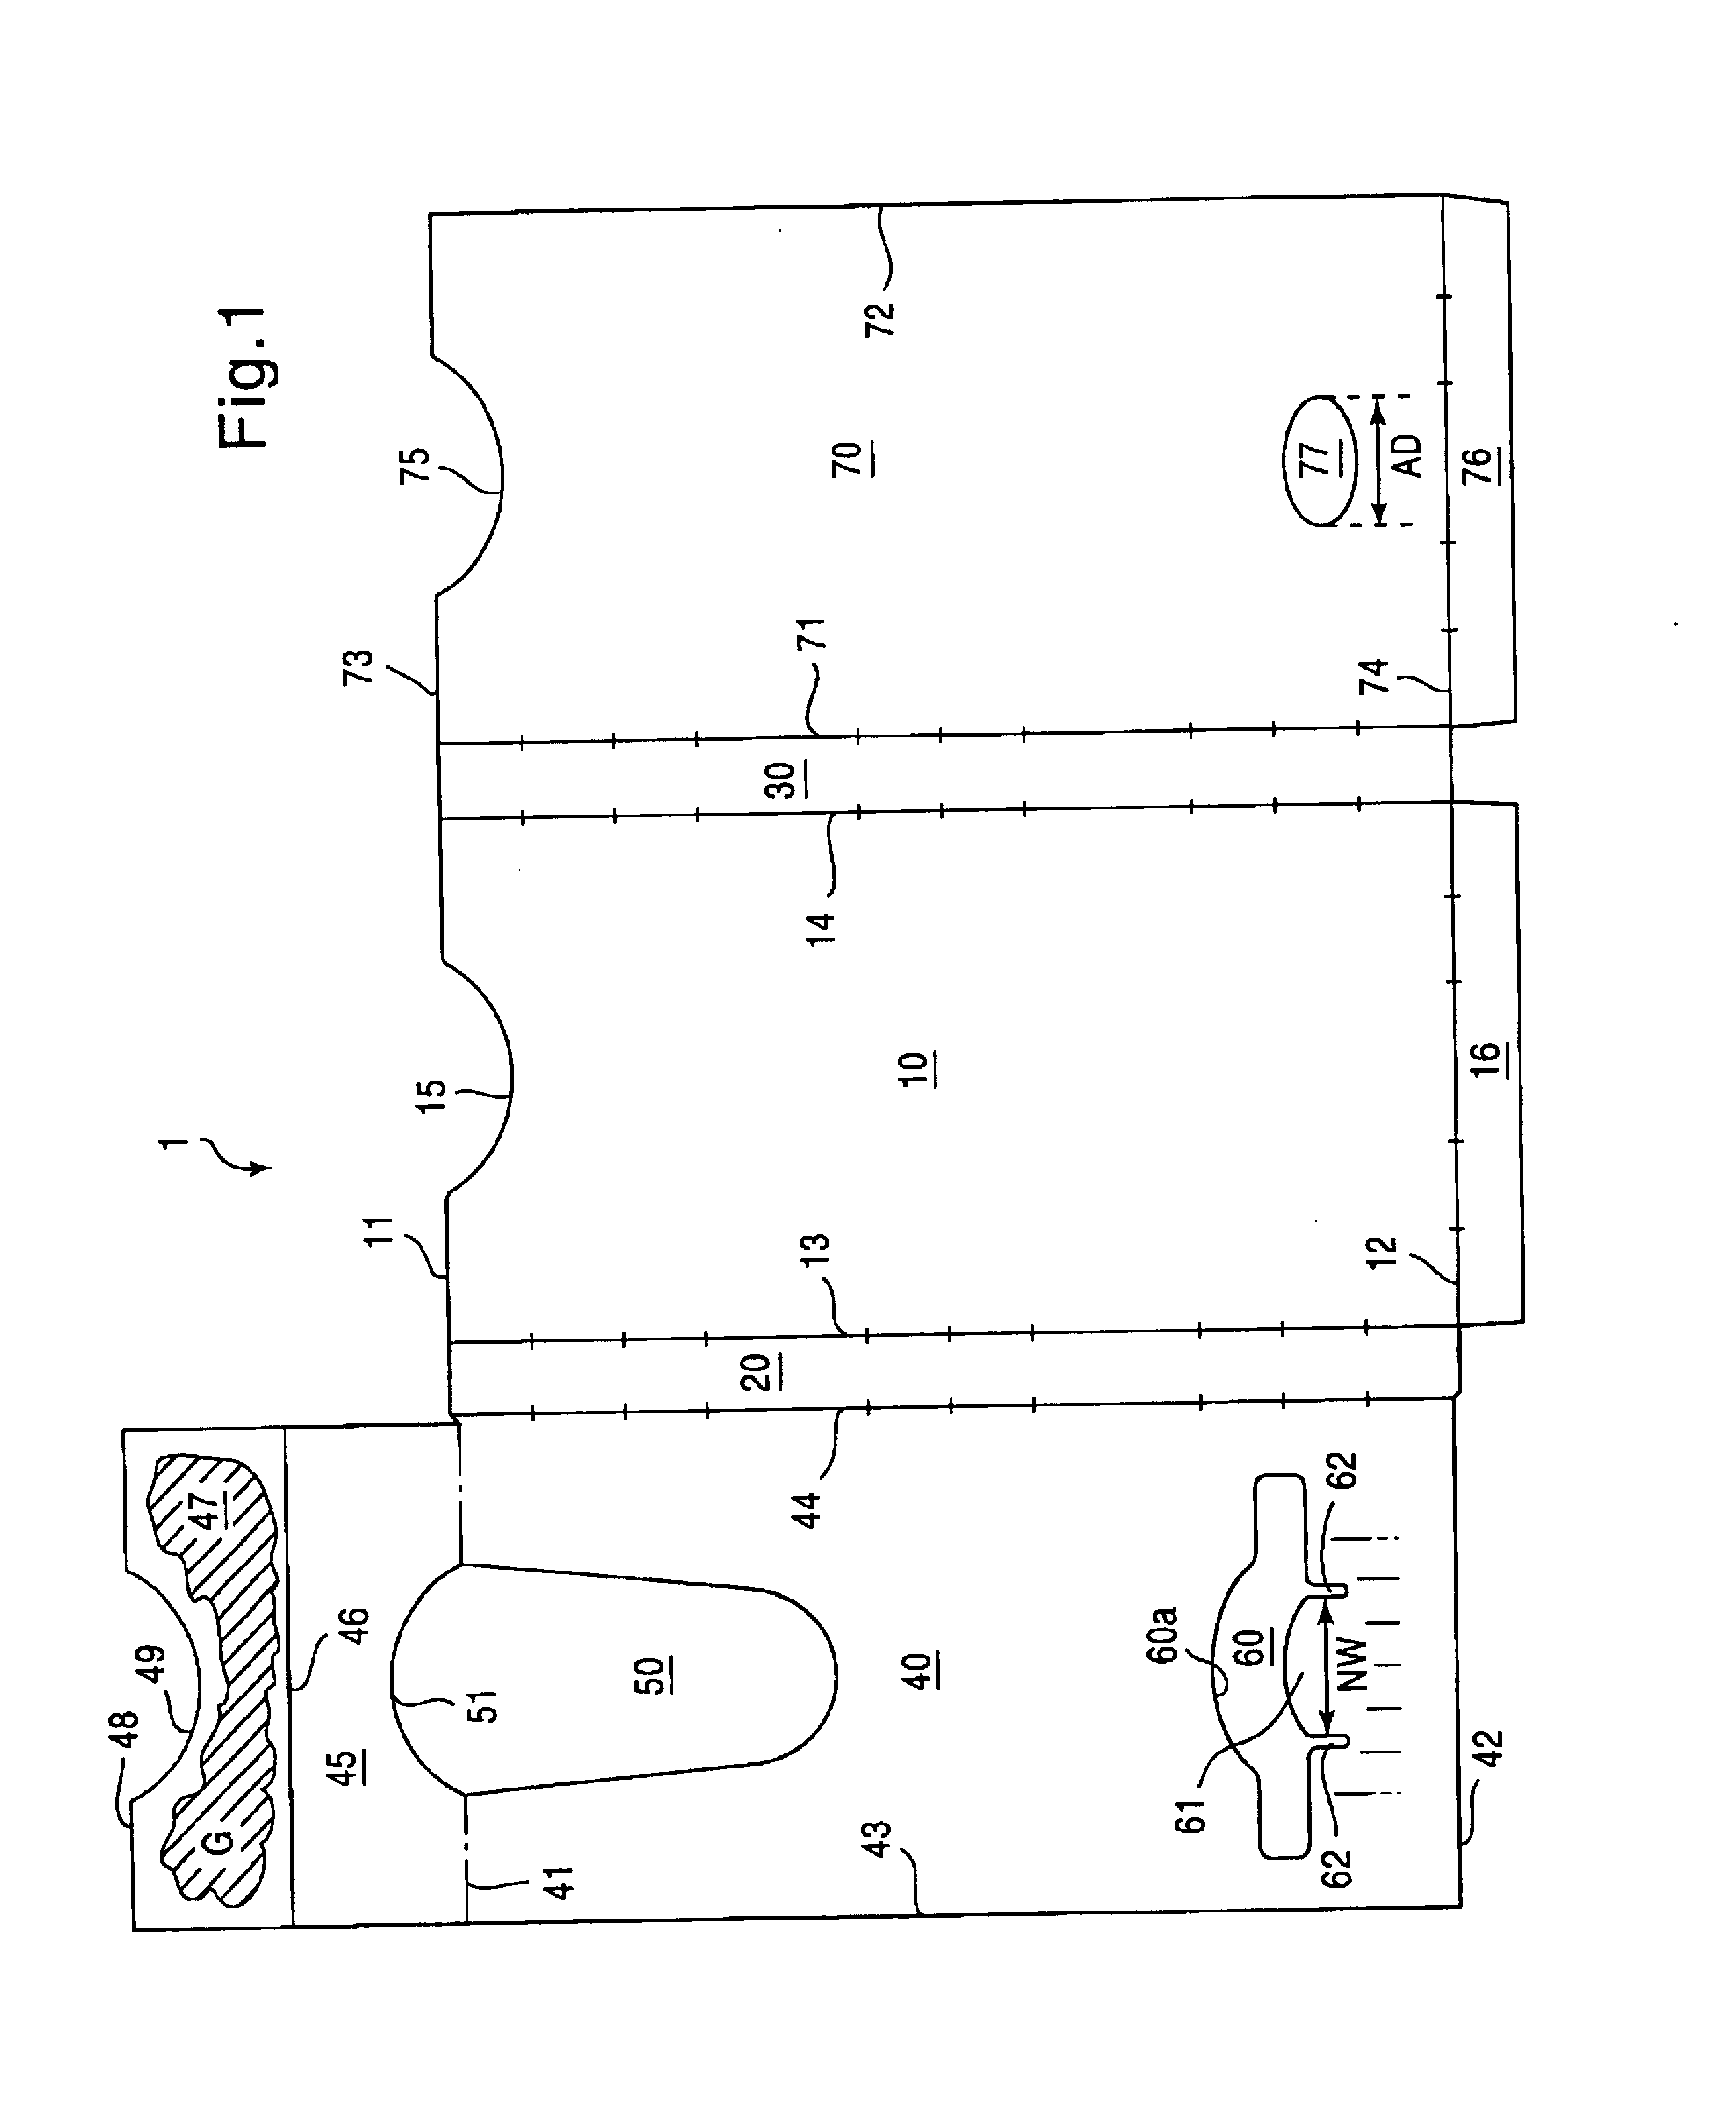 Lock and release mechanism of child resistant unit dose package